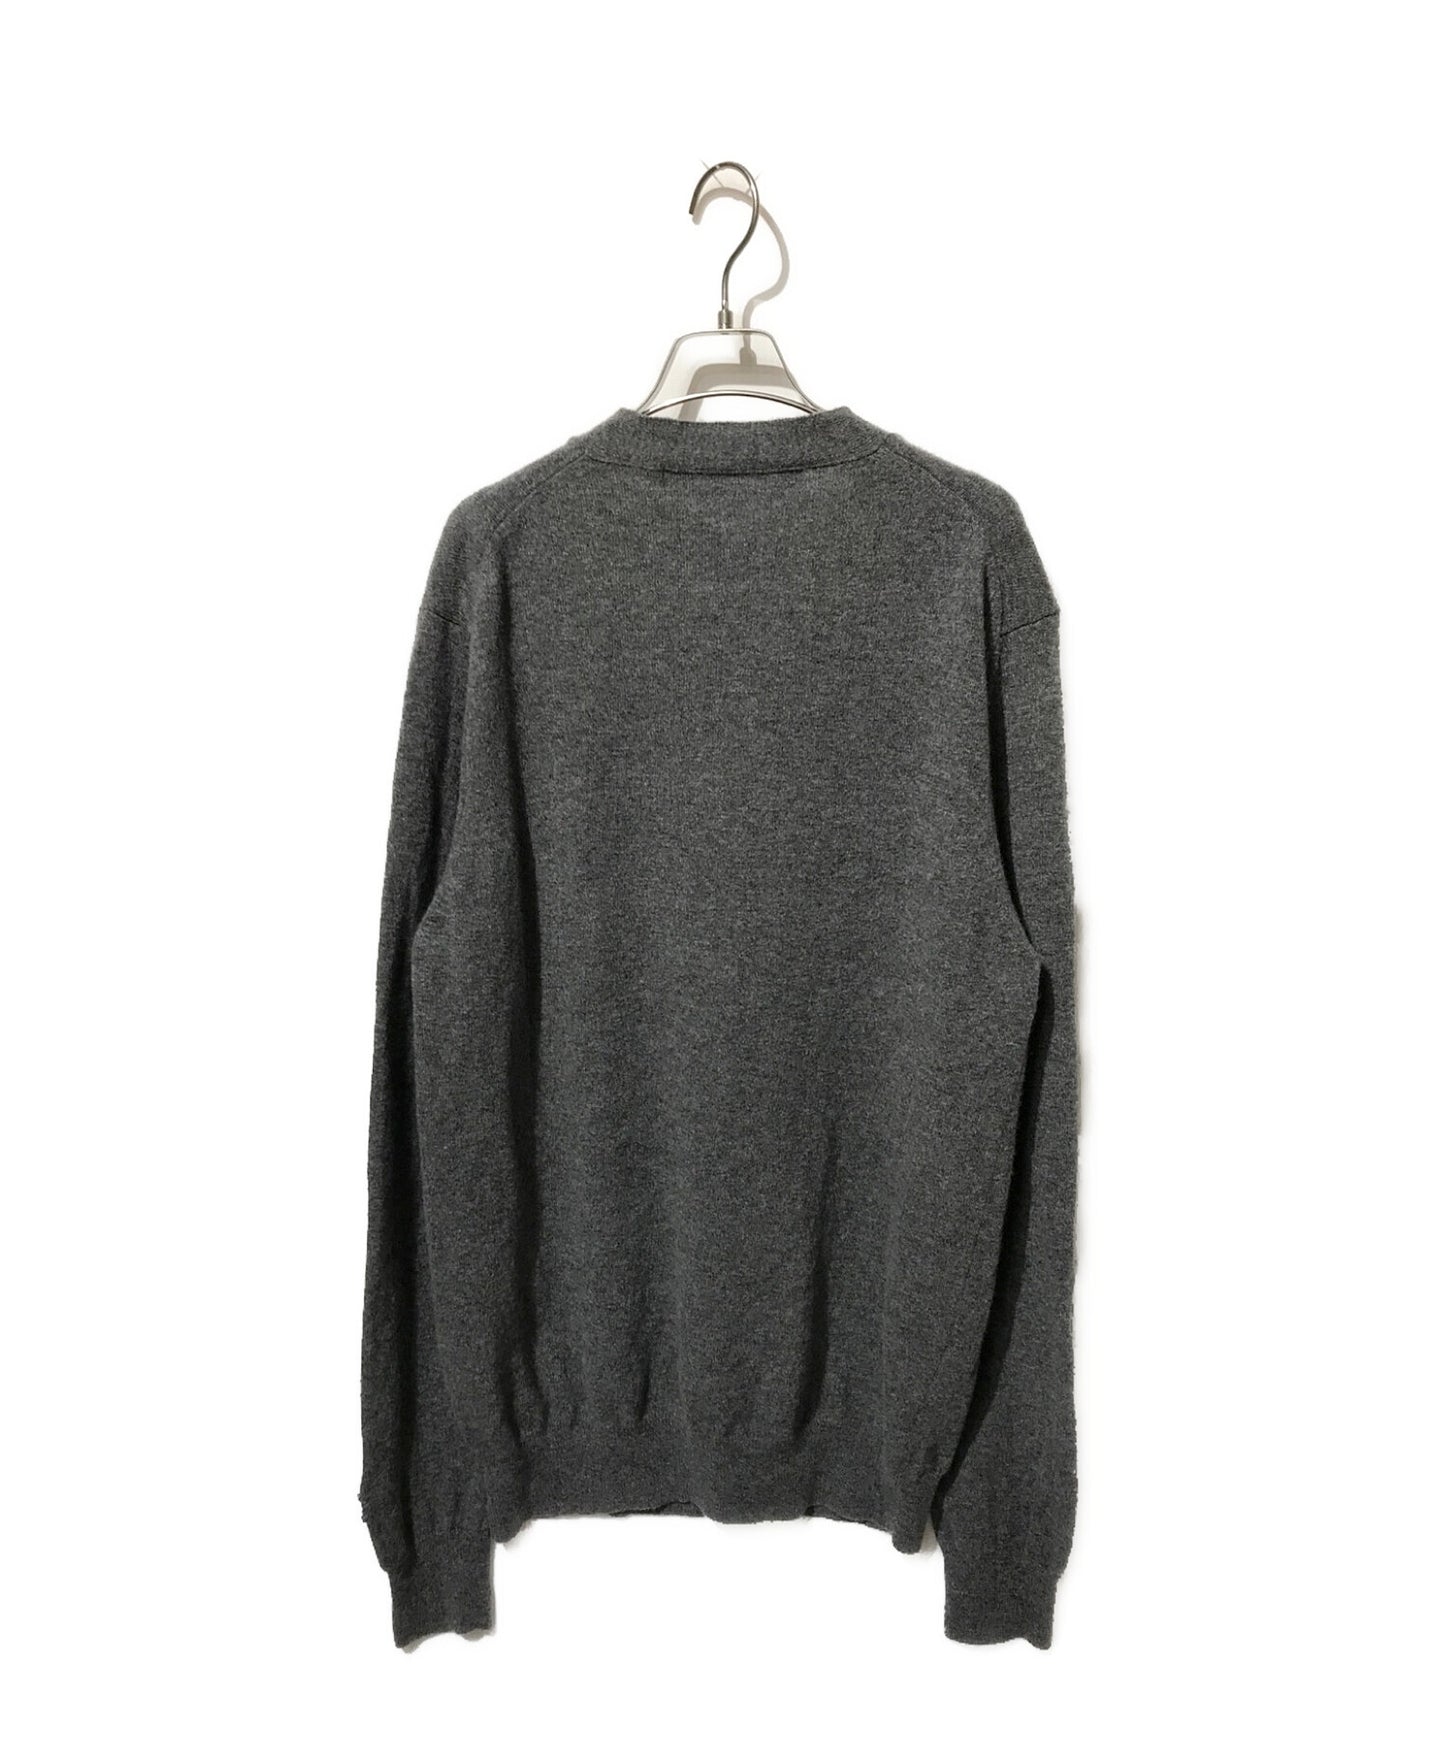 Comme des Garcons Knitted Cardigan AZ-N088을 재생하십시오